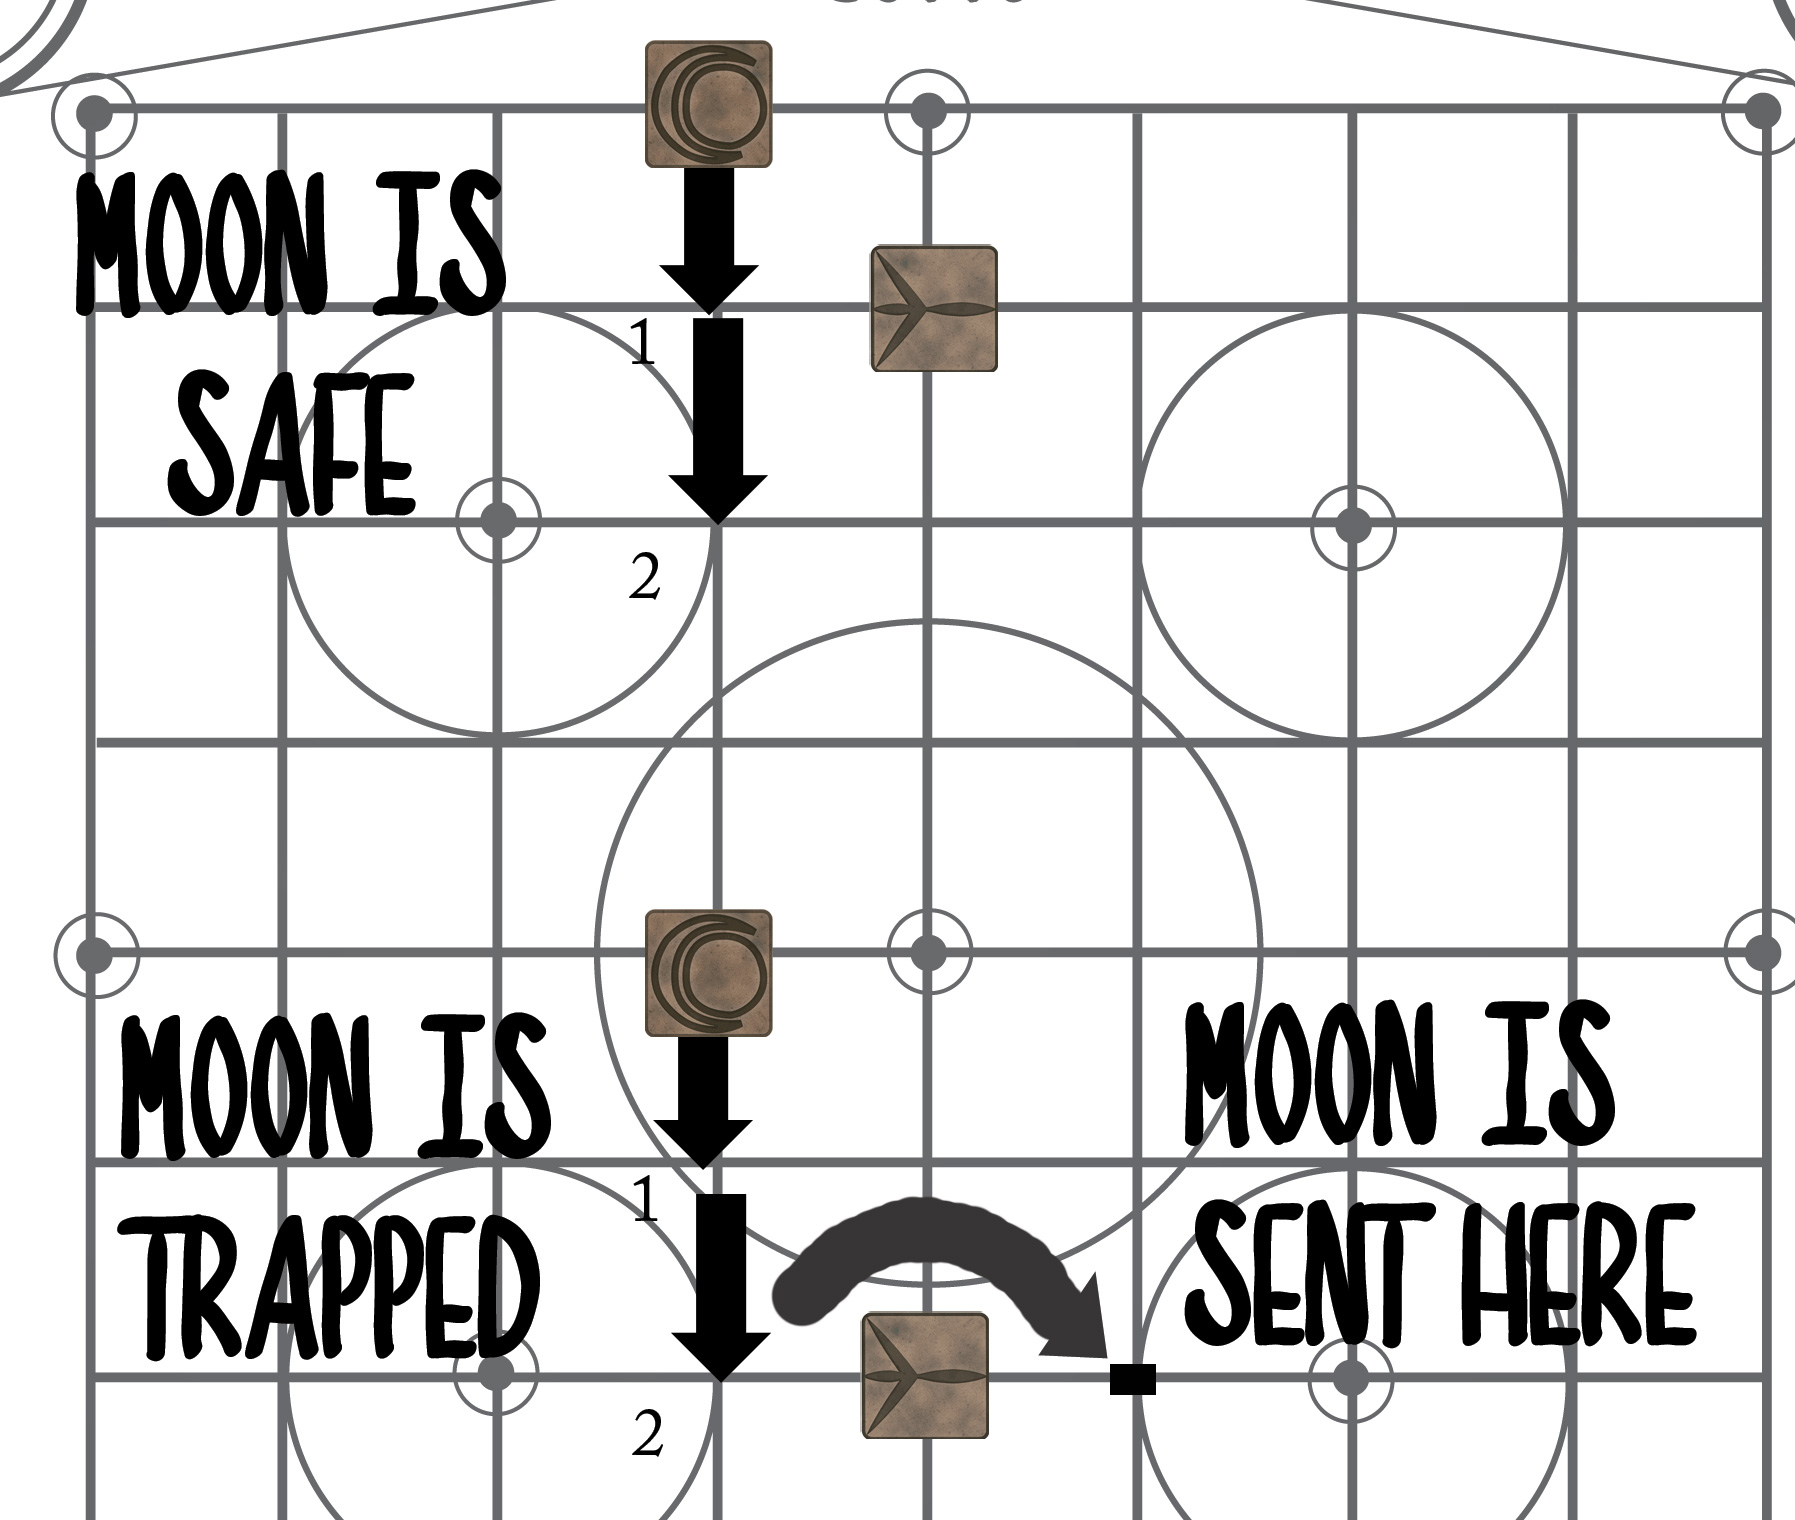 Moons and traps